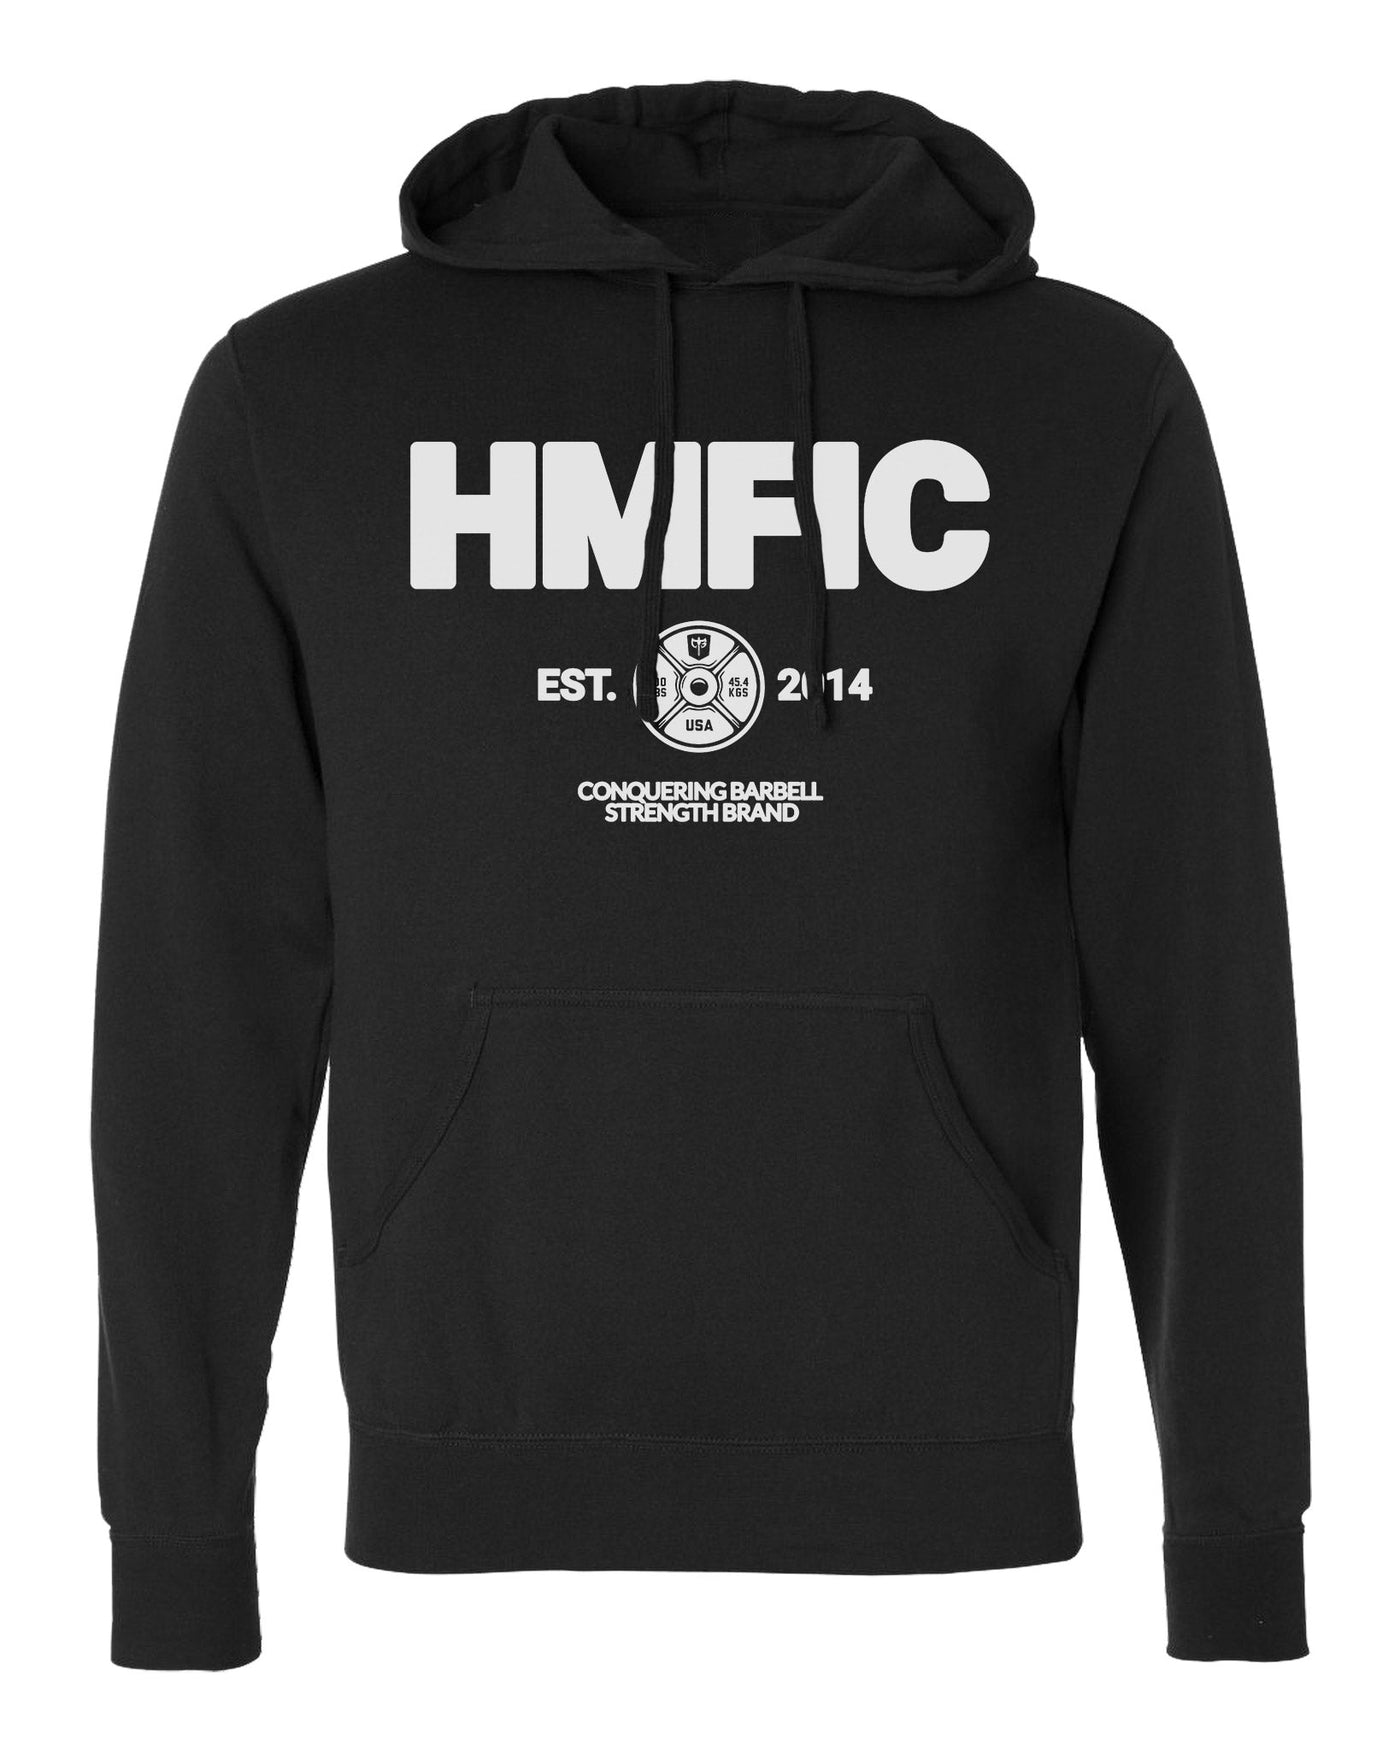 HMFIC - on Black Pullover Hoodie - Conquering Barbell